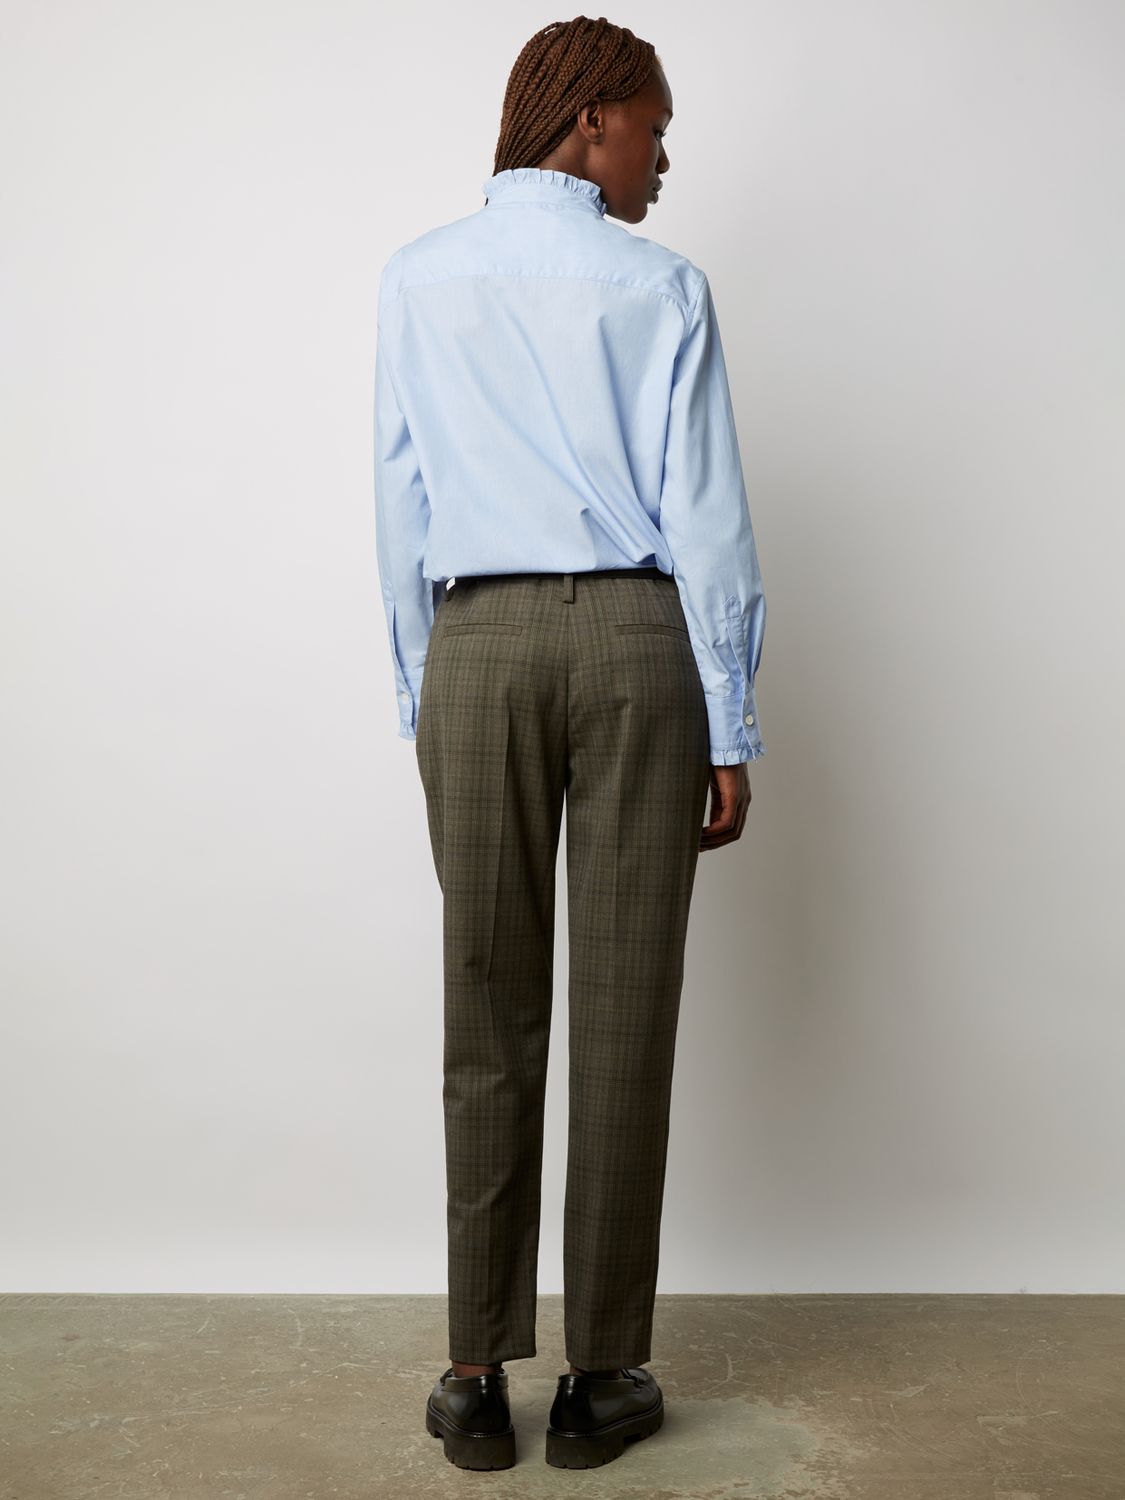 Buy Gerard Darel Edelweiss Check Trousers, Brown Online at johnlewis.com